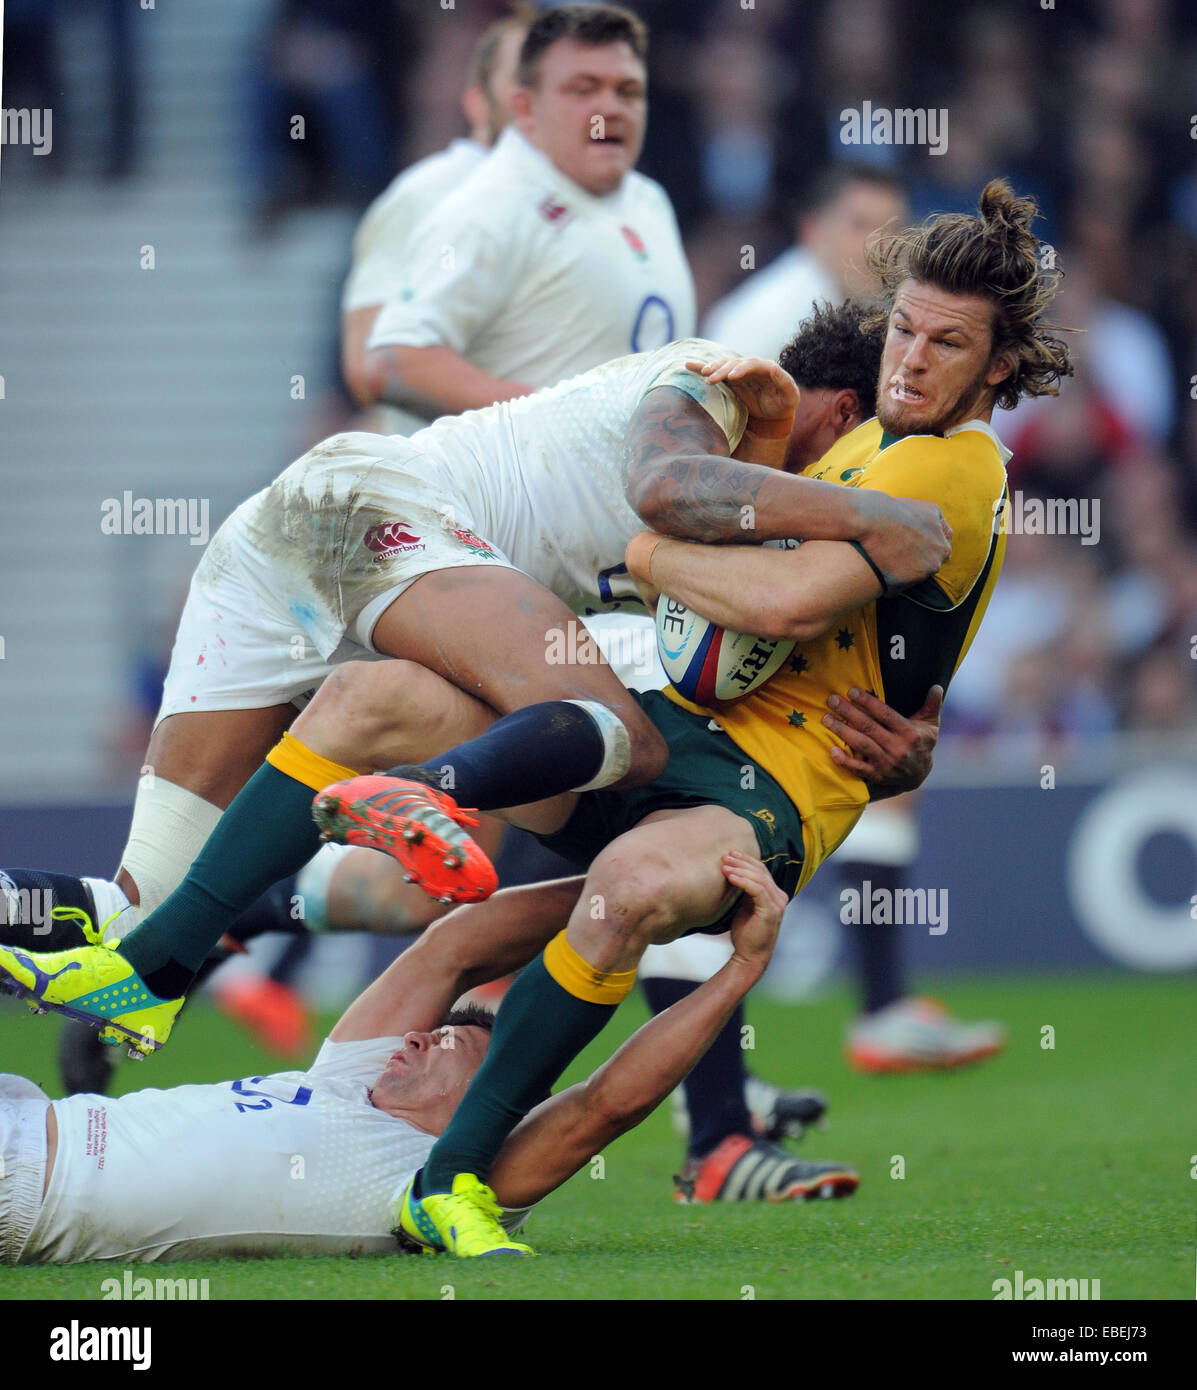 Twickenham, London, UK. 29th November, 2014. England Rob Horne Tackeld By Courtney Lawes, Ben Youngs England V Australia England V Australia, Qbe Autumn International 2014 Twickenham, London, England 29 November 2014 Qbe Autumn International, 29/11/2014 Credit:  Allstar Picture Library/Alamy Live News Stock Photo